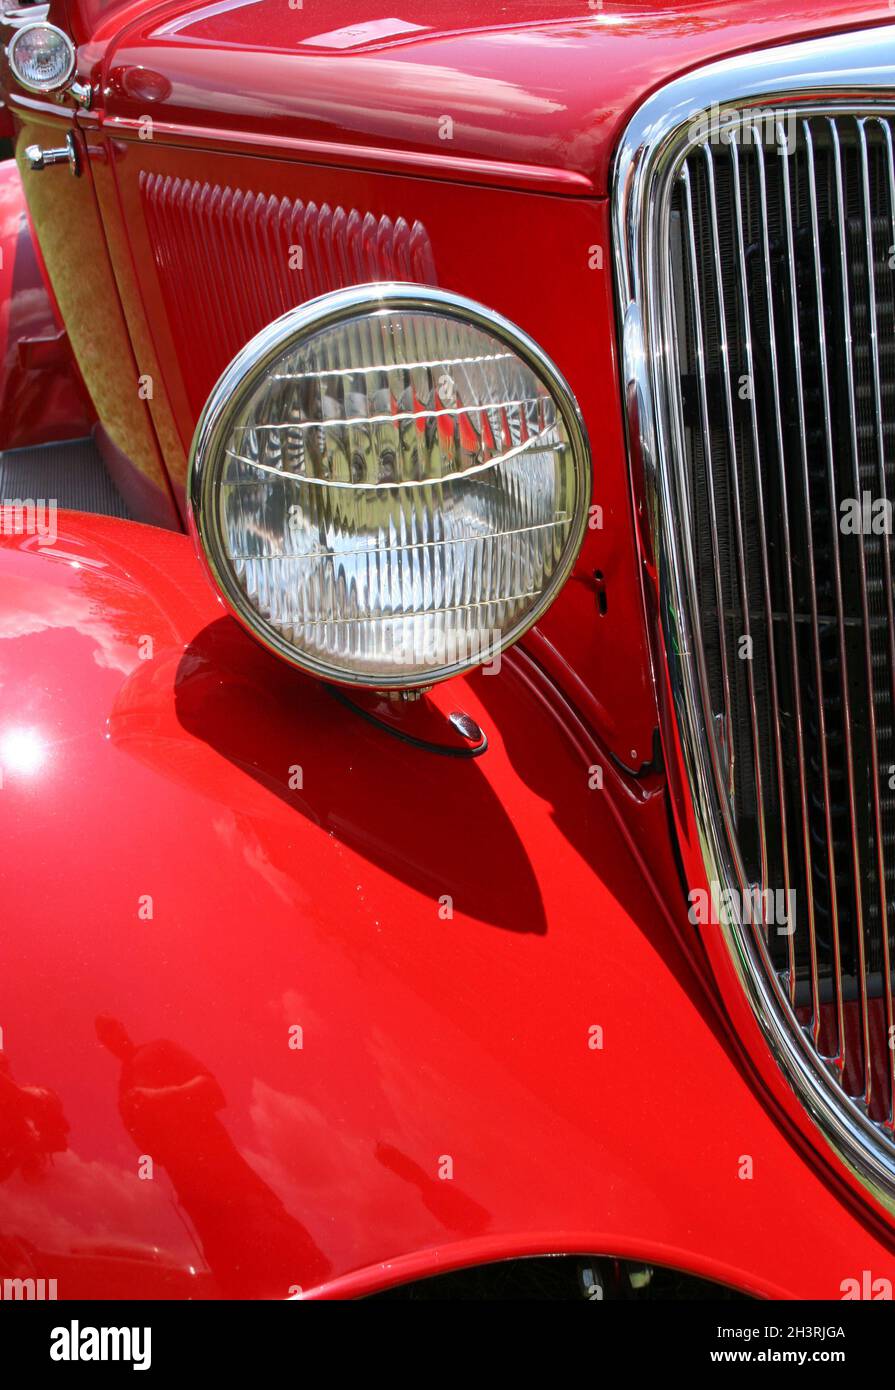 Antique Vintage Hot Rod Car Close-up Red Stock Photo